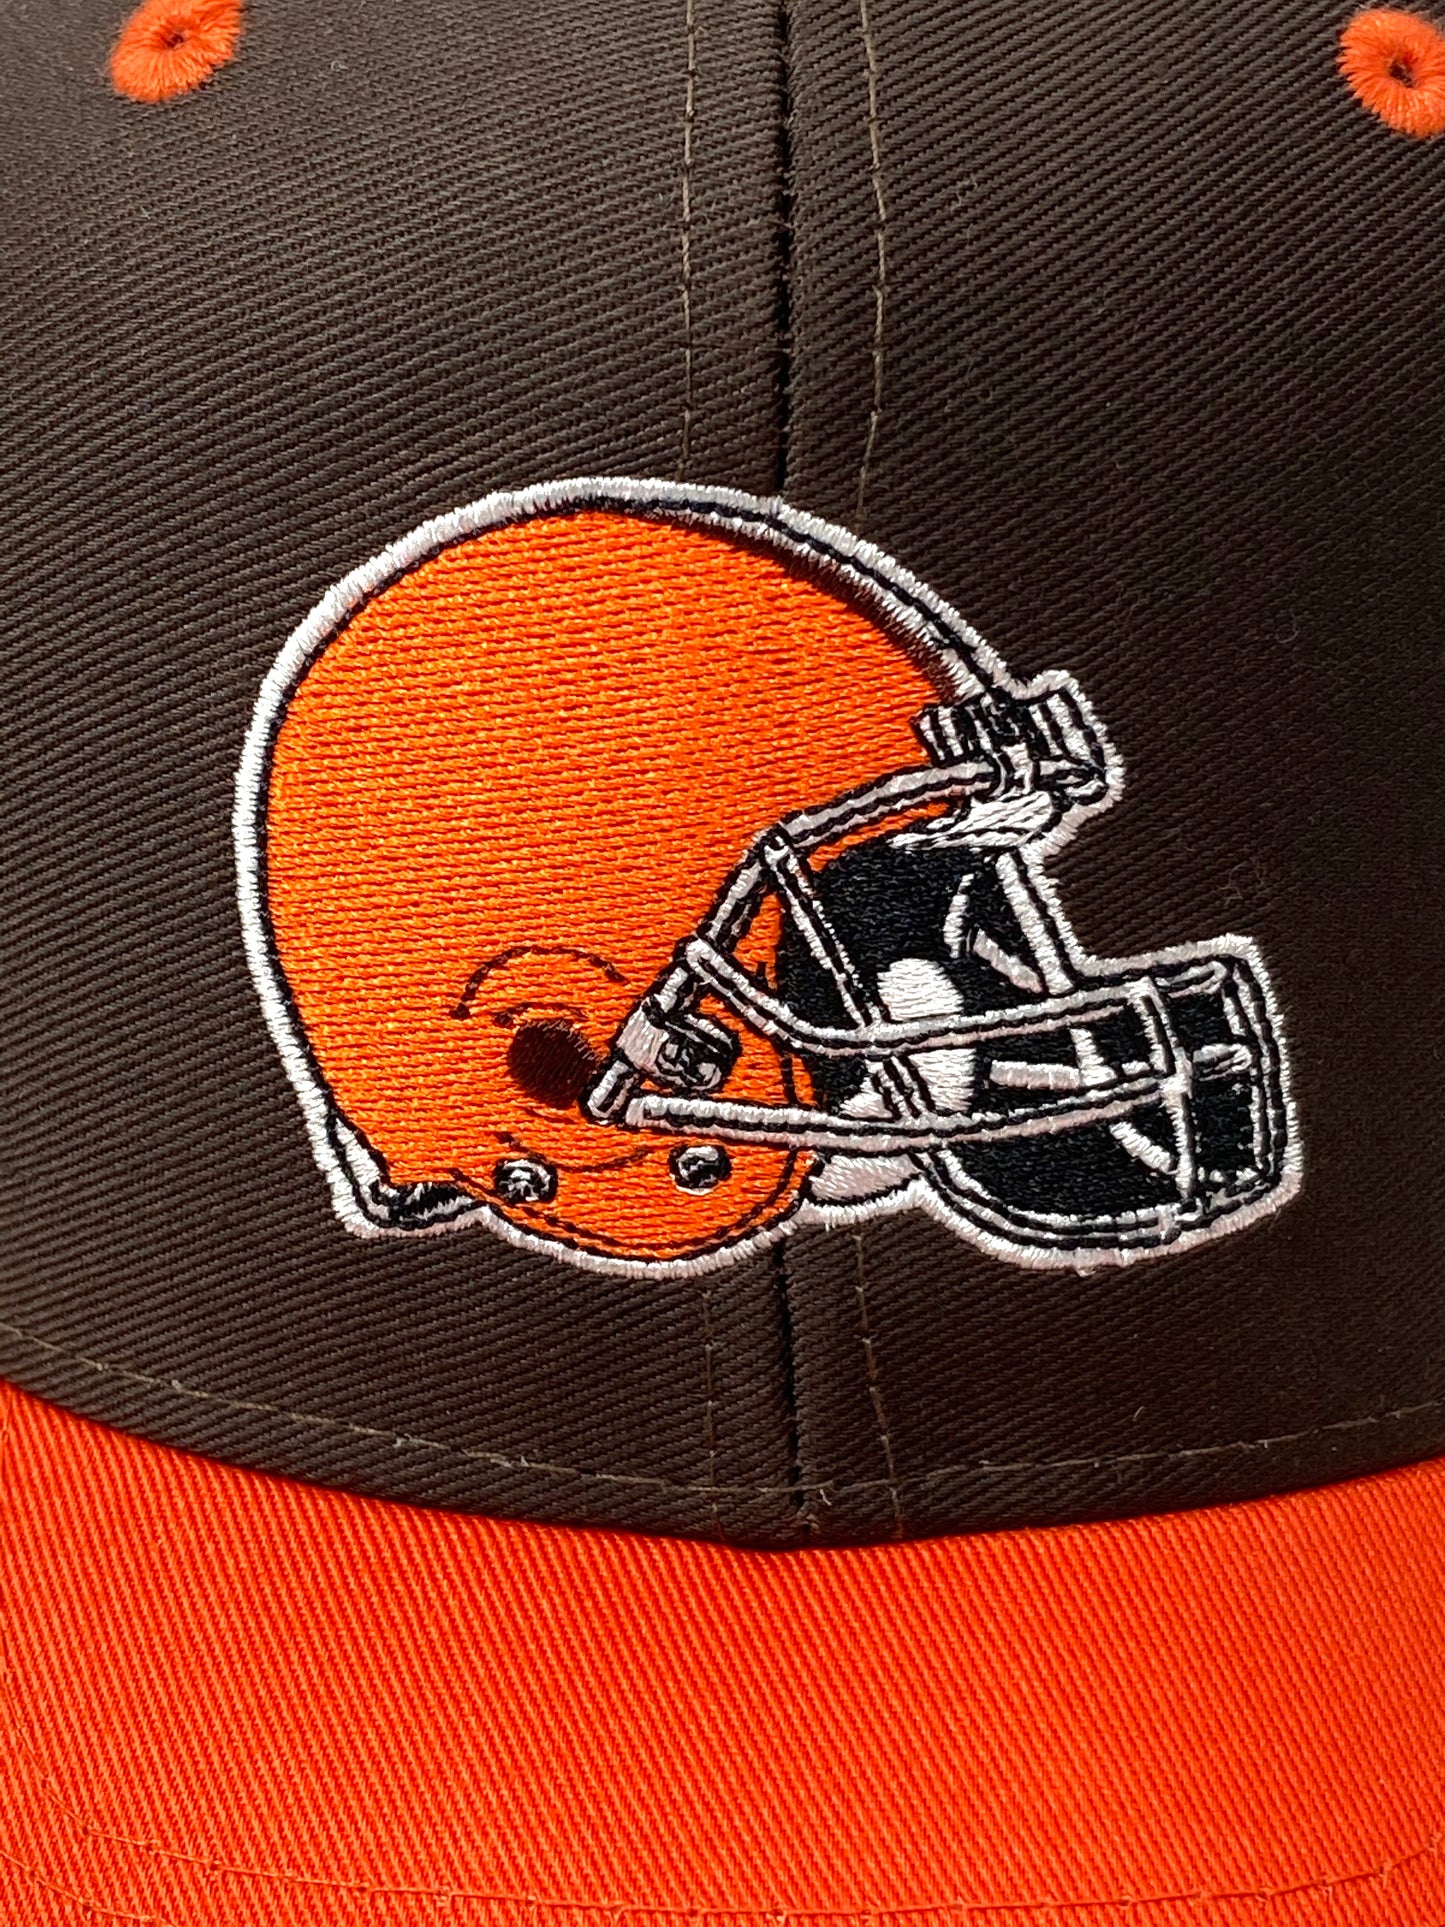 Cleveland Browns Vintage NFL Embroidered Replica Snapback by Logo Athletic